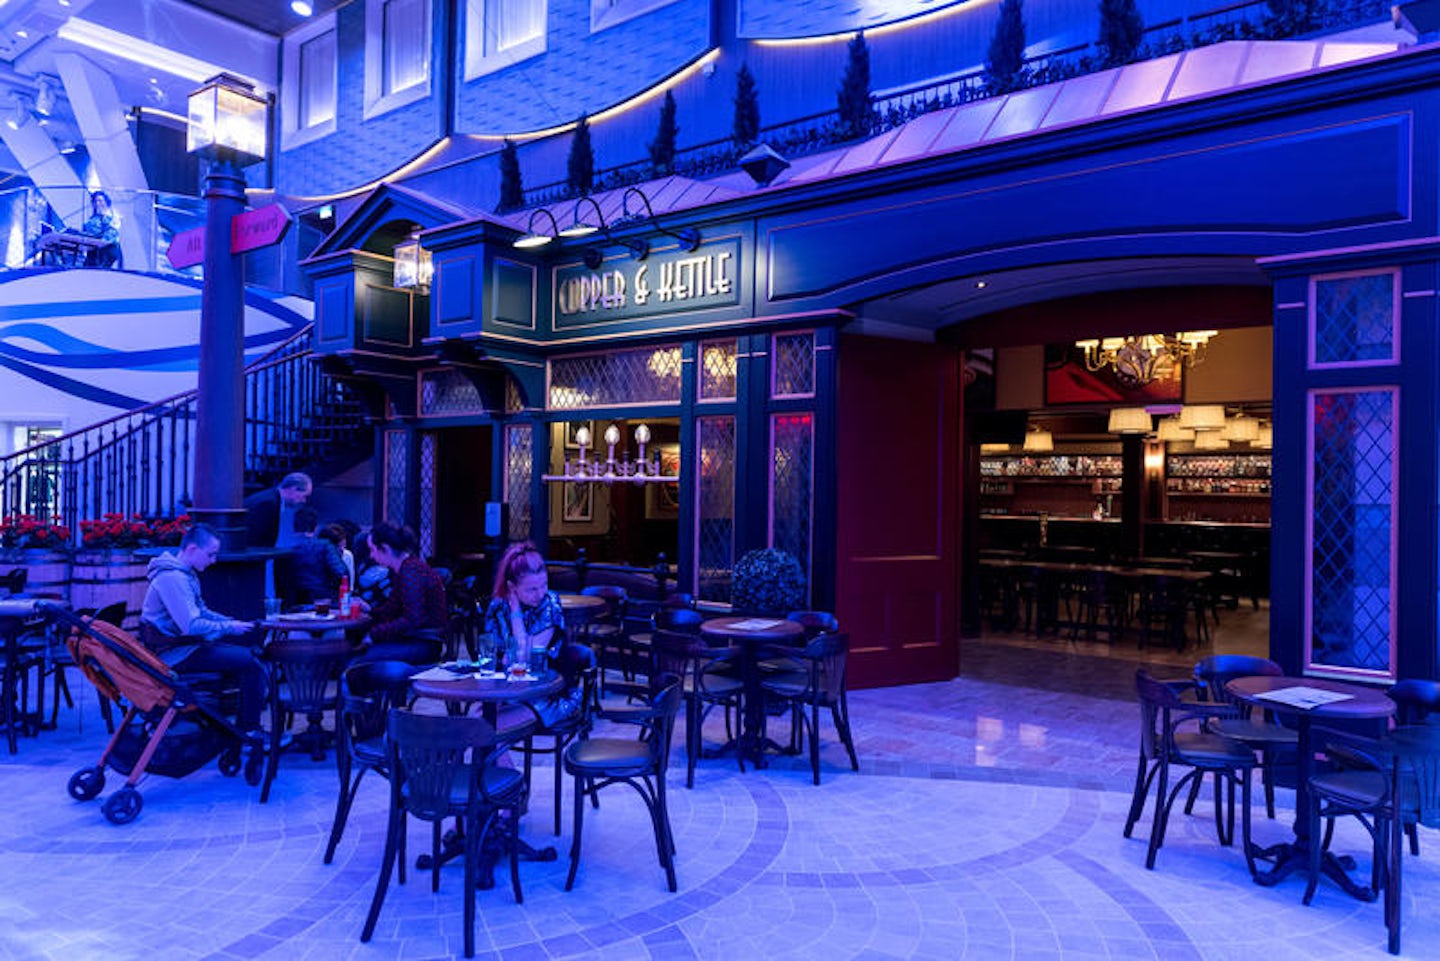 Copper & Kettle Pub on Symphony of the Seas